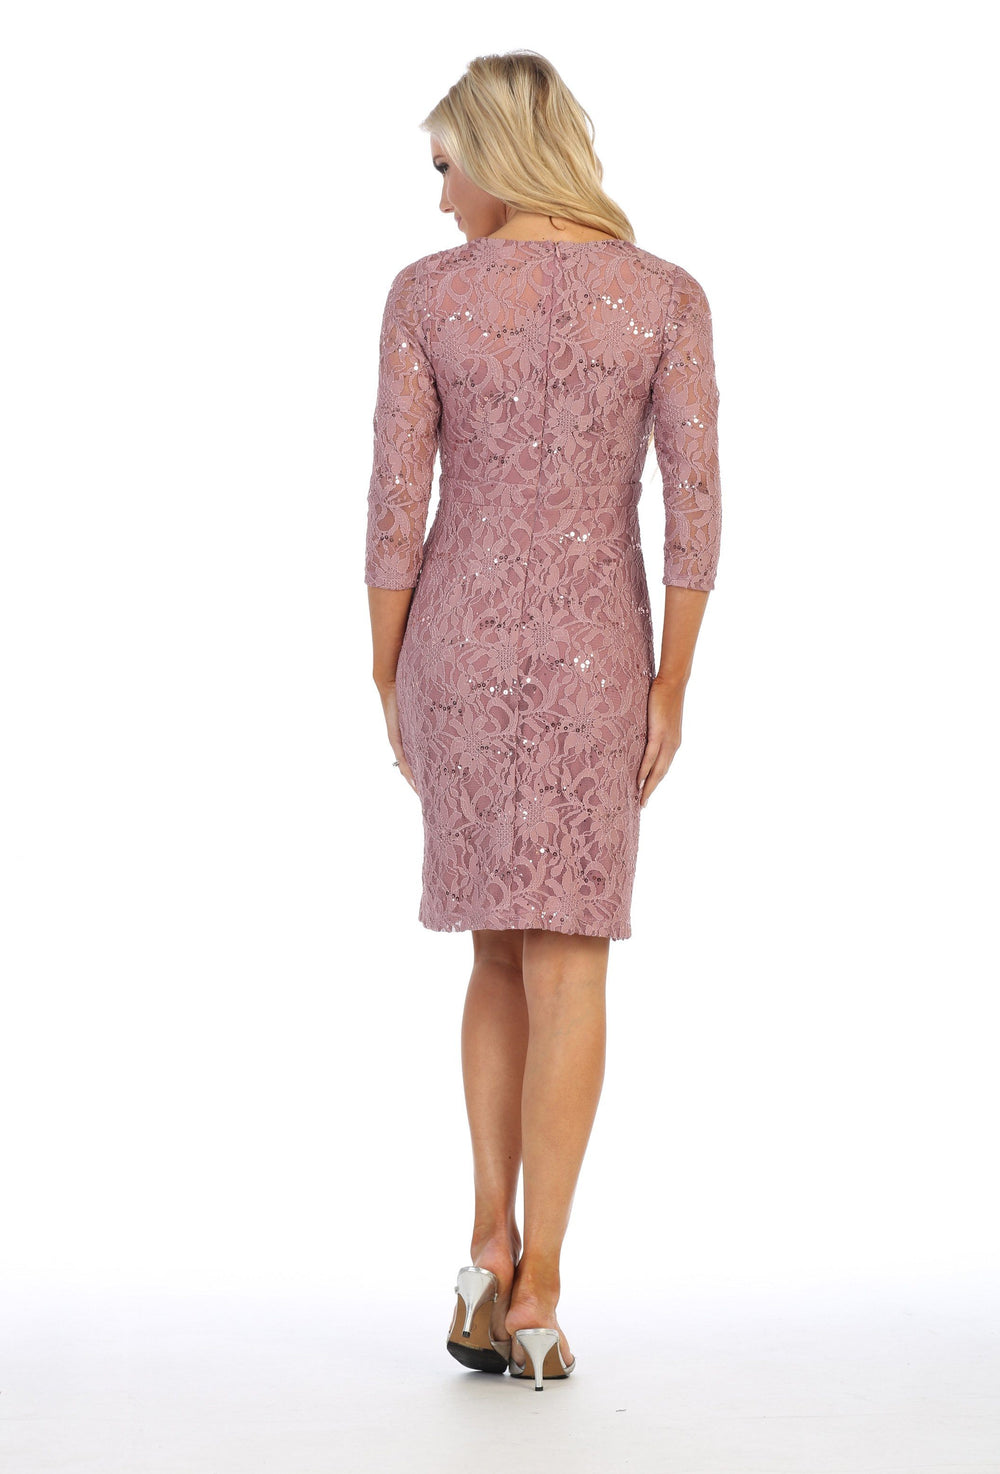 Short Floral Lace Dress with Sleeves by Celavie 6415-Short Cocktail Dresses-ABC Fashion